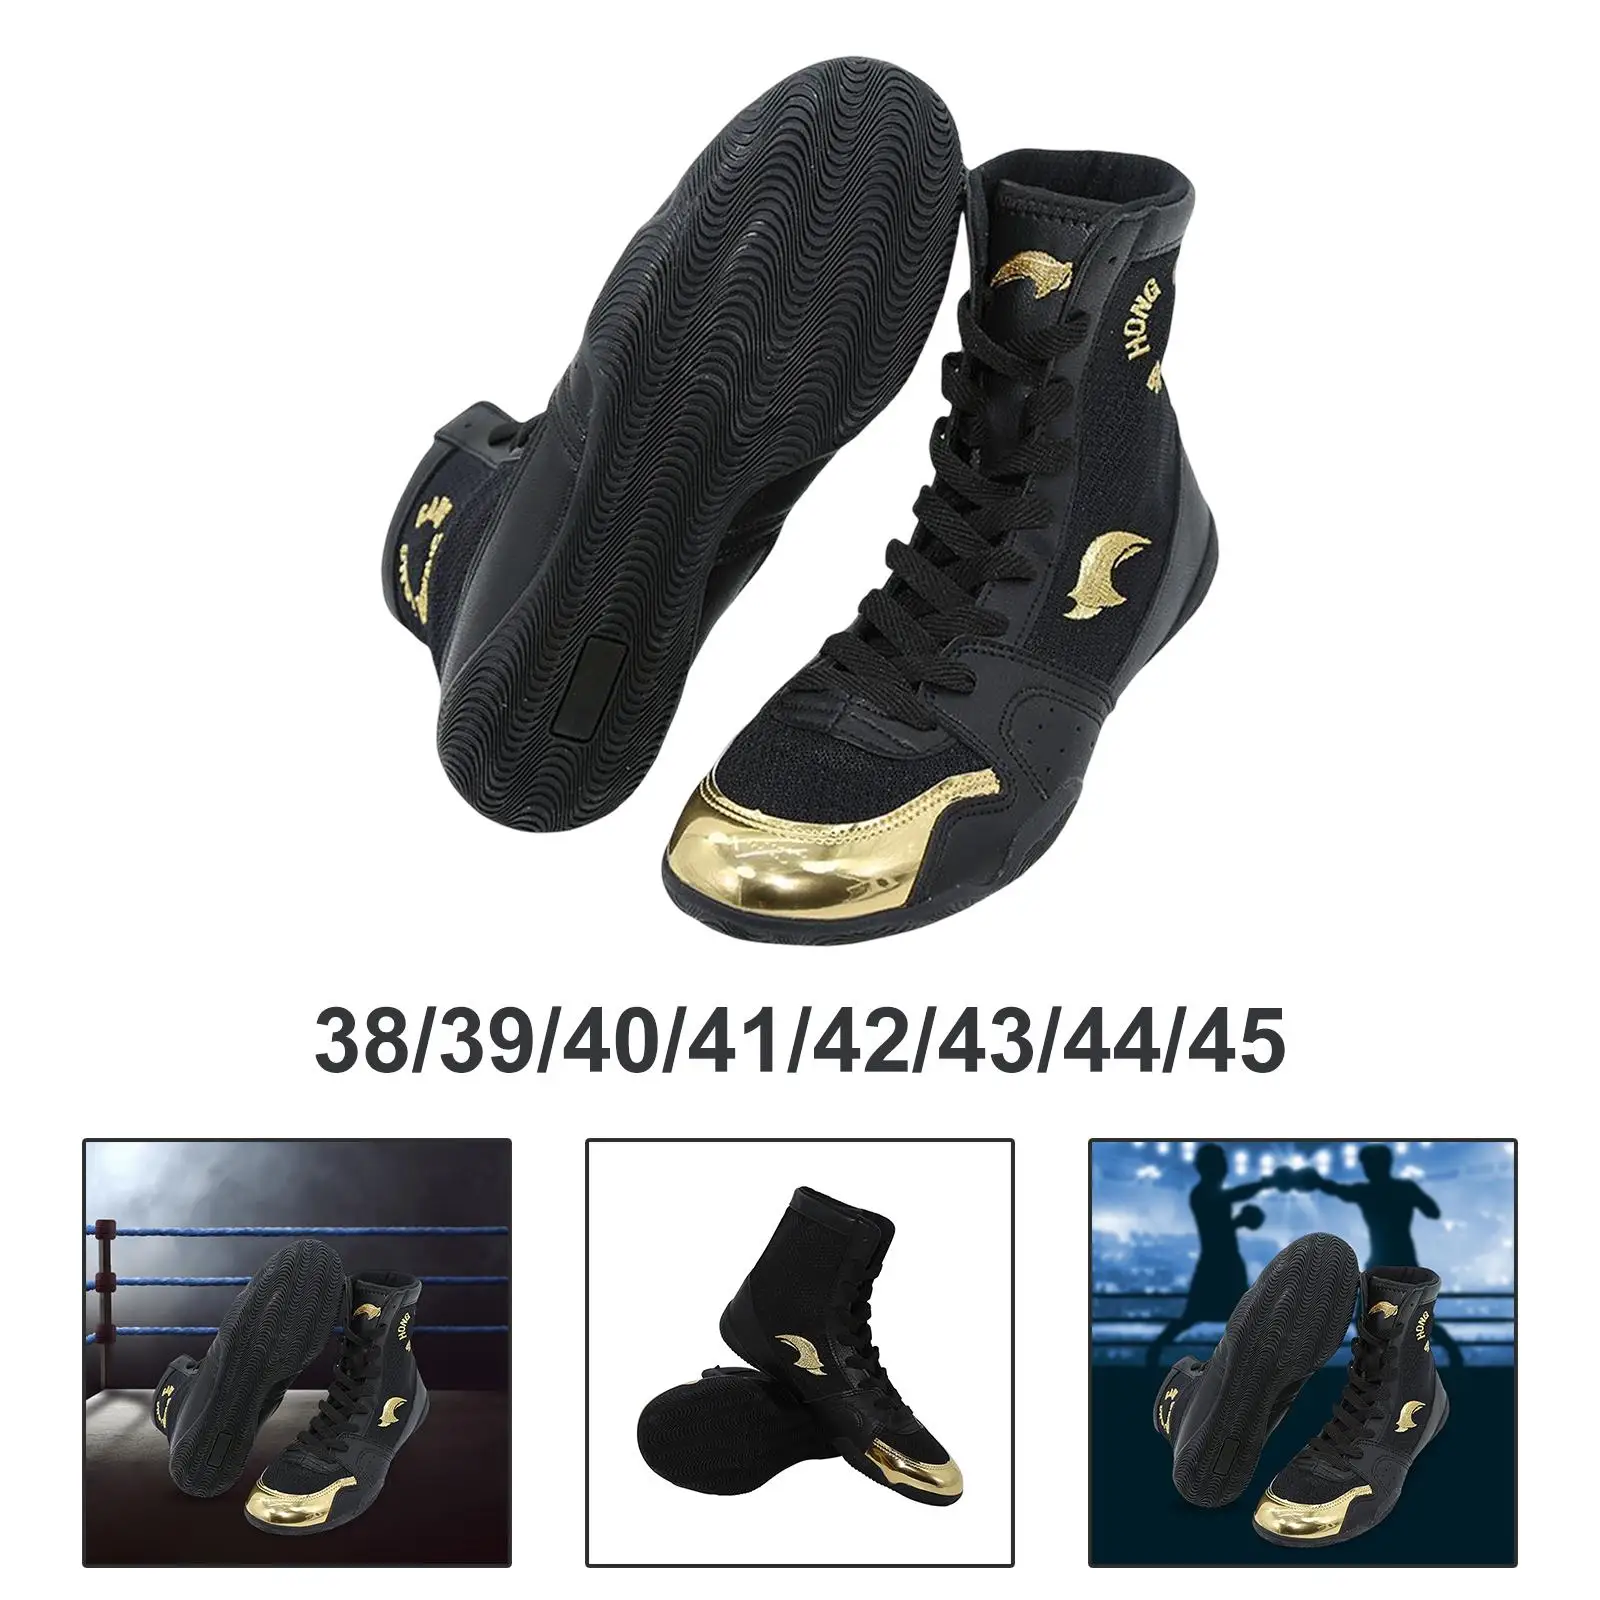 Kick Boxing Shoes Wrestling Boots Unisex Adults Lightweight Footwear MMA Fighting Taekwondo Accessories Practice